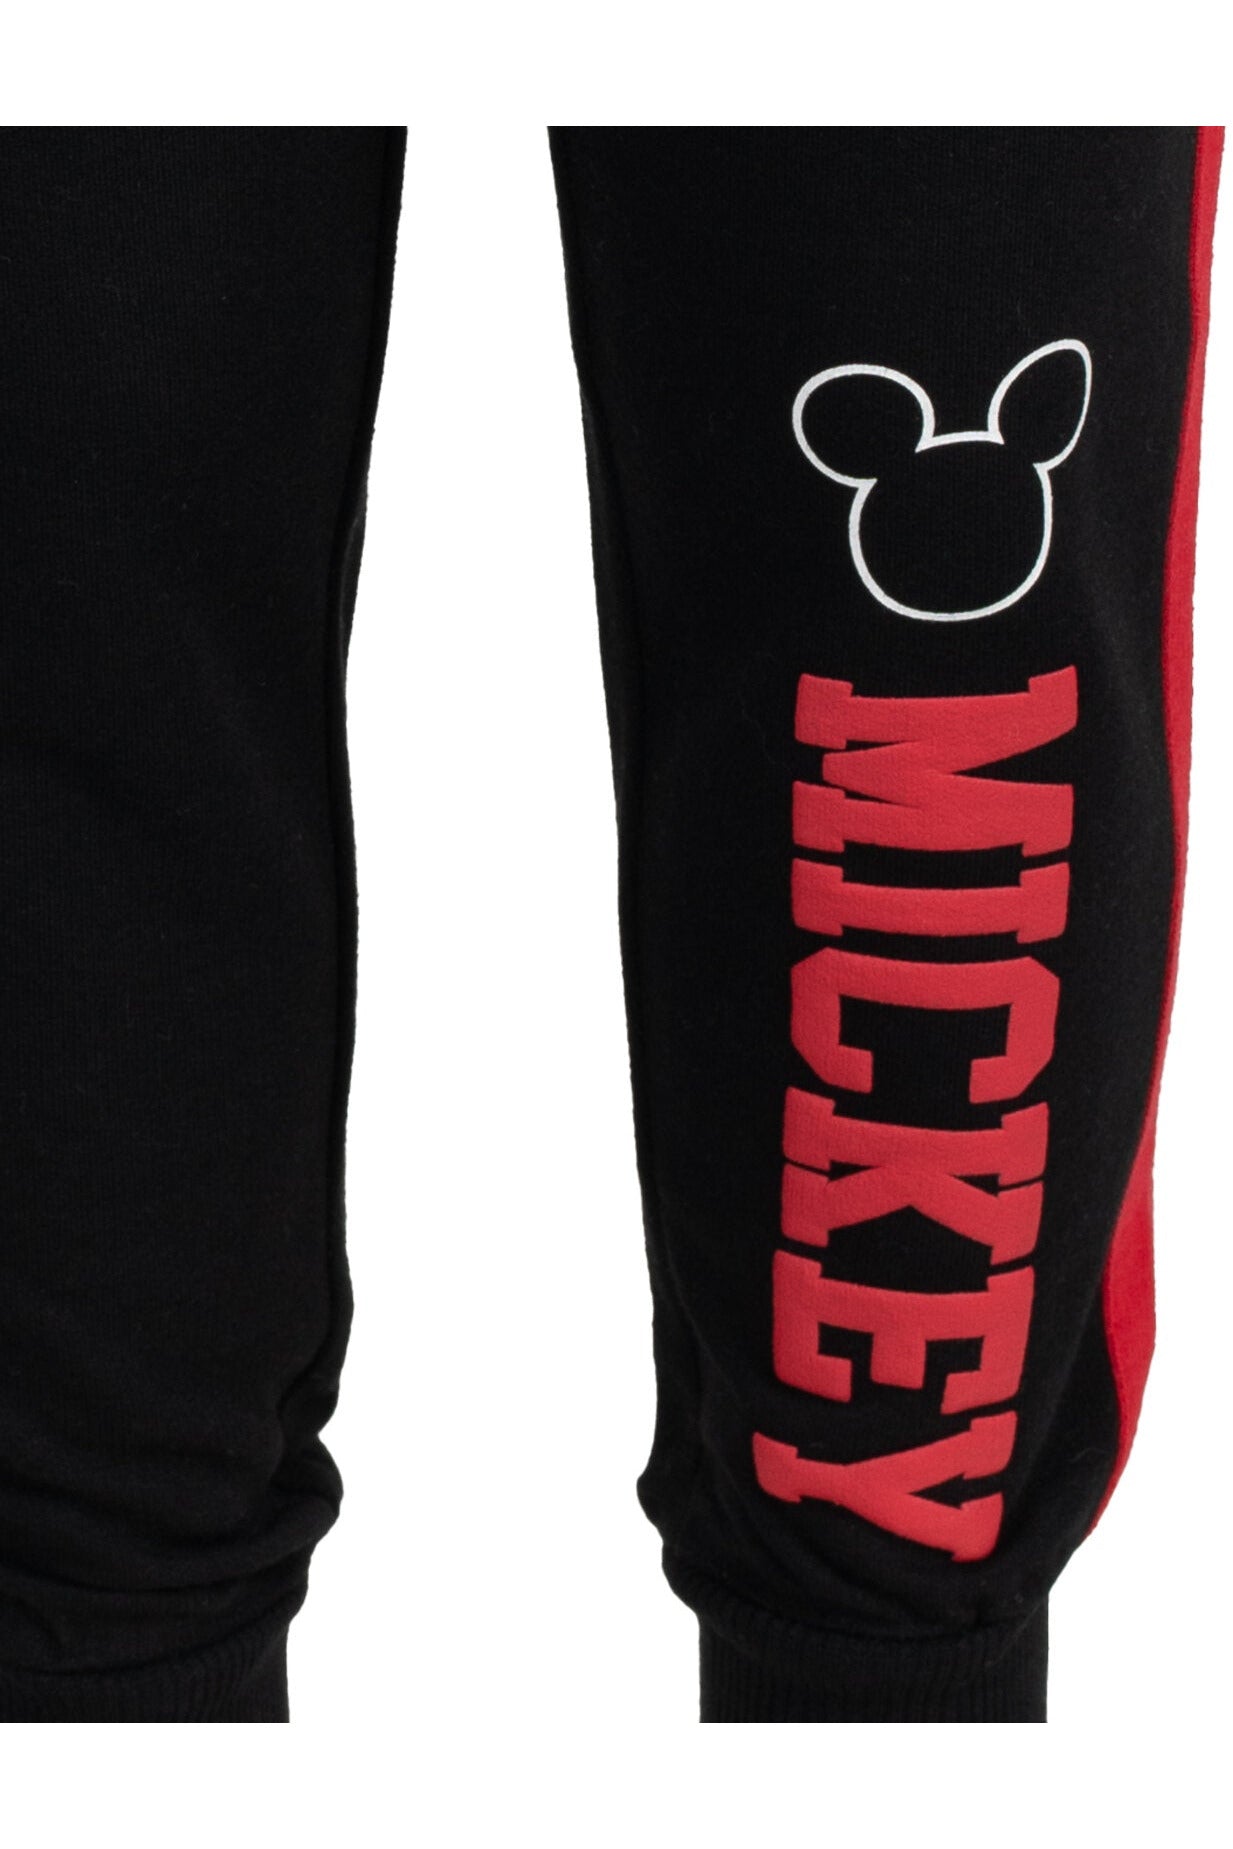 Disney Mickey Mouse French Terry 2 Pack Pants - imagikids